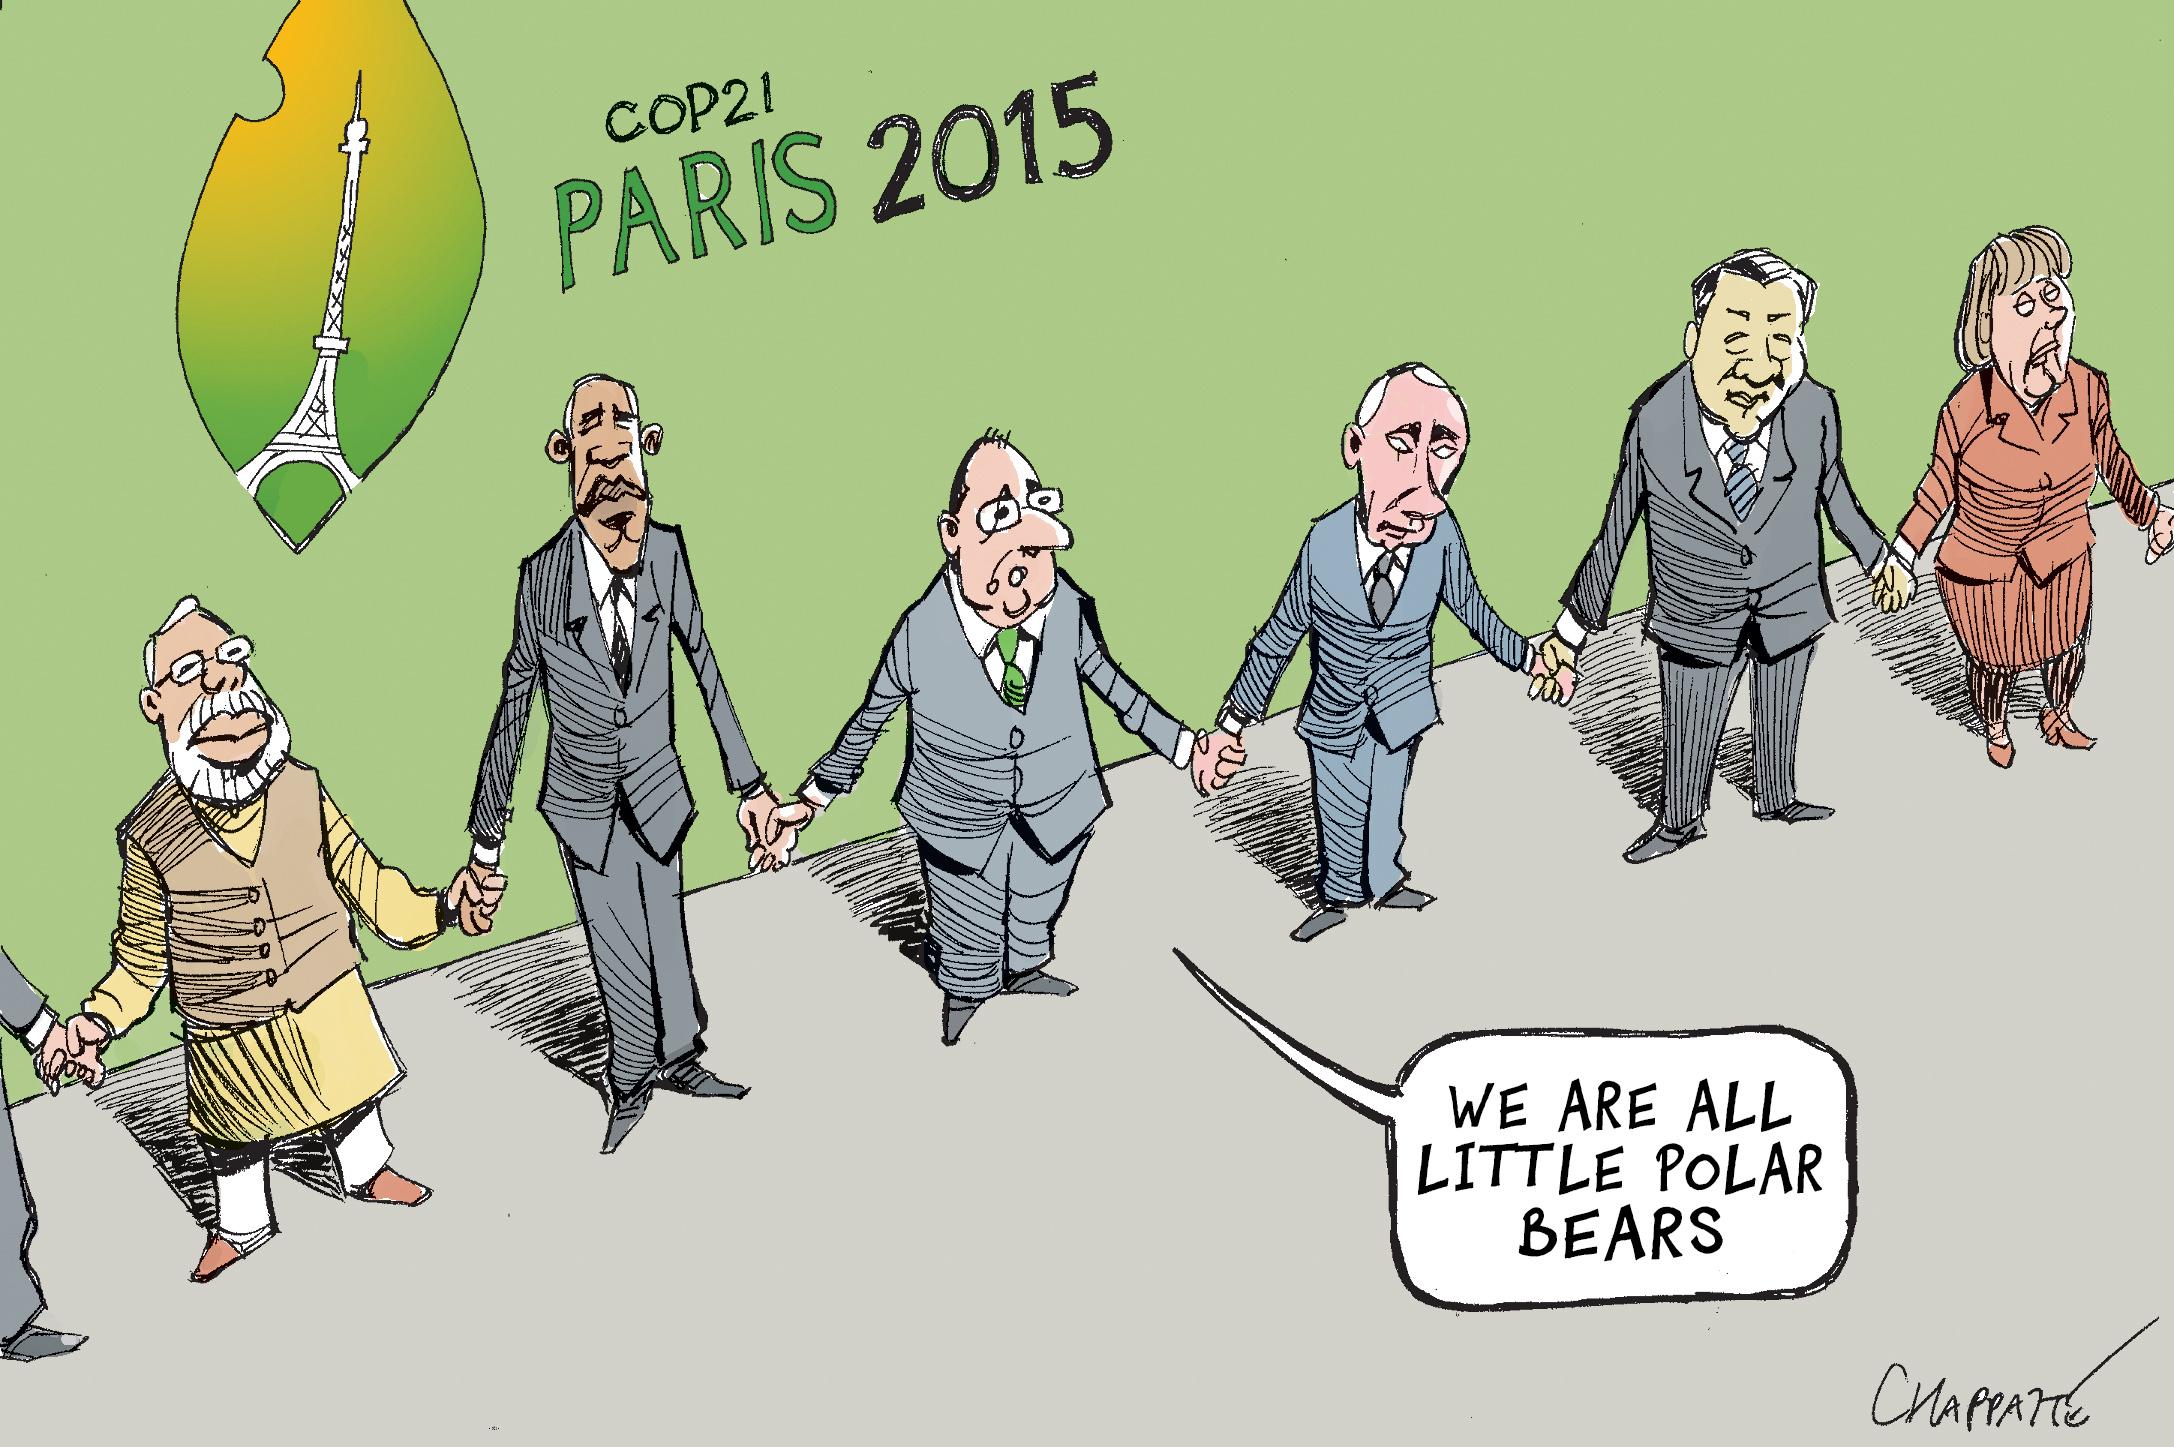 Heads of State Gather in Paris